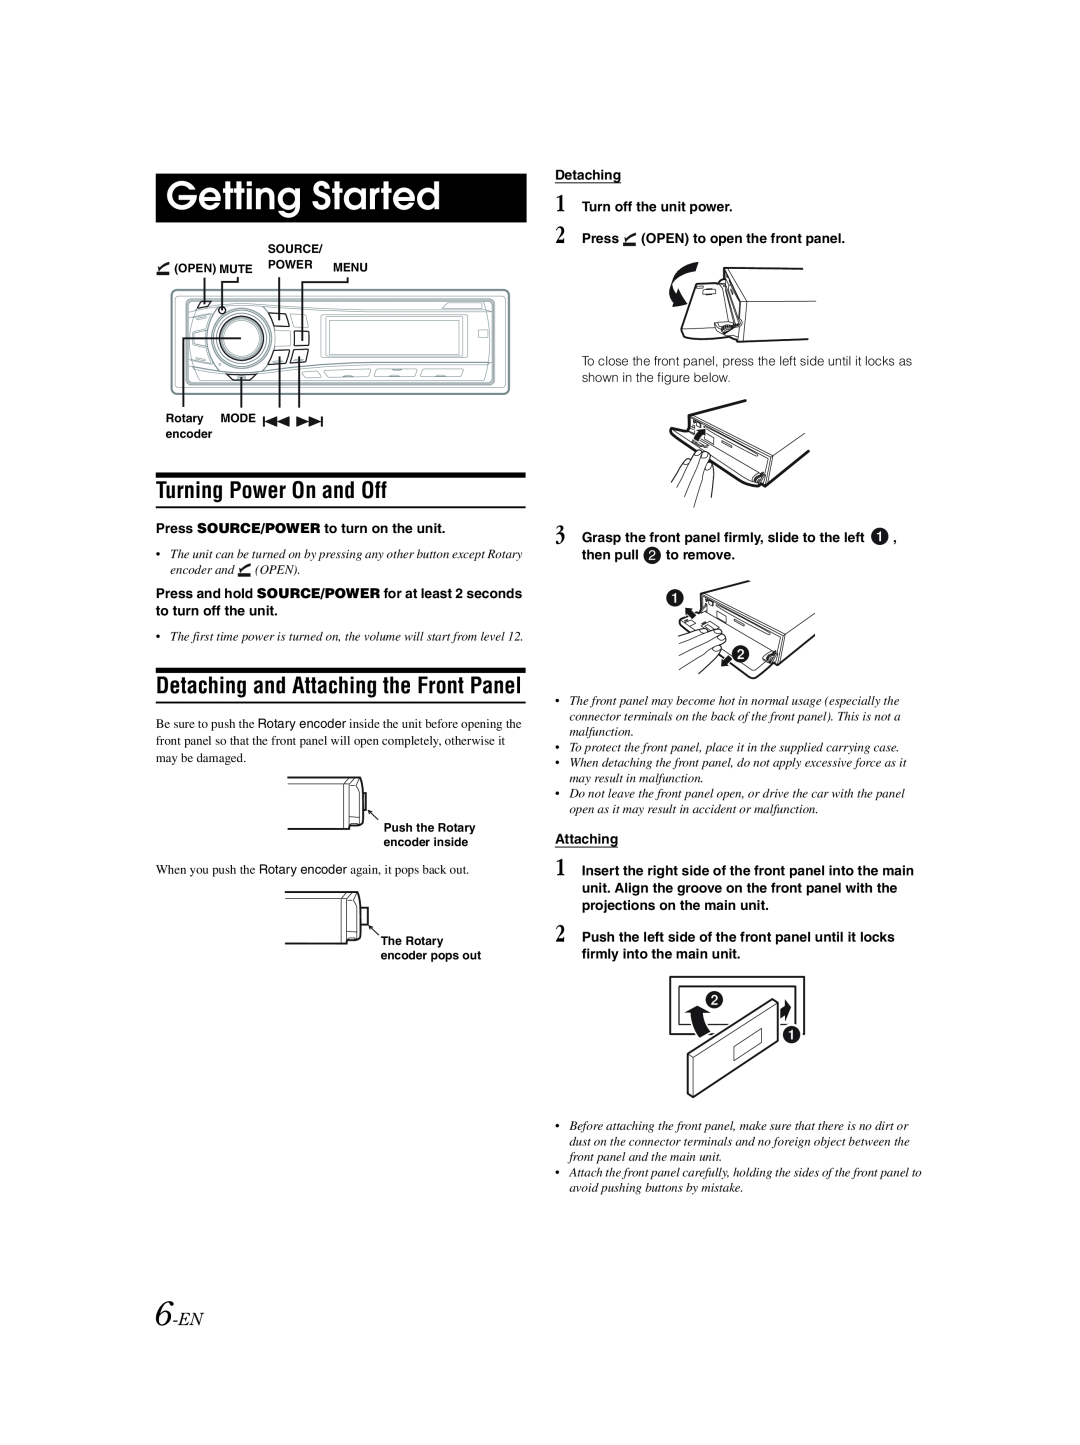 Alpine CDA-9857 owner manual Getting Started, Turning Power On and Off, Detaching and Attaching the Front Panel, 6-EN 